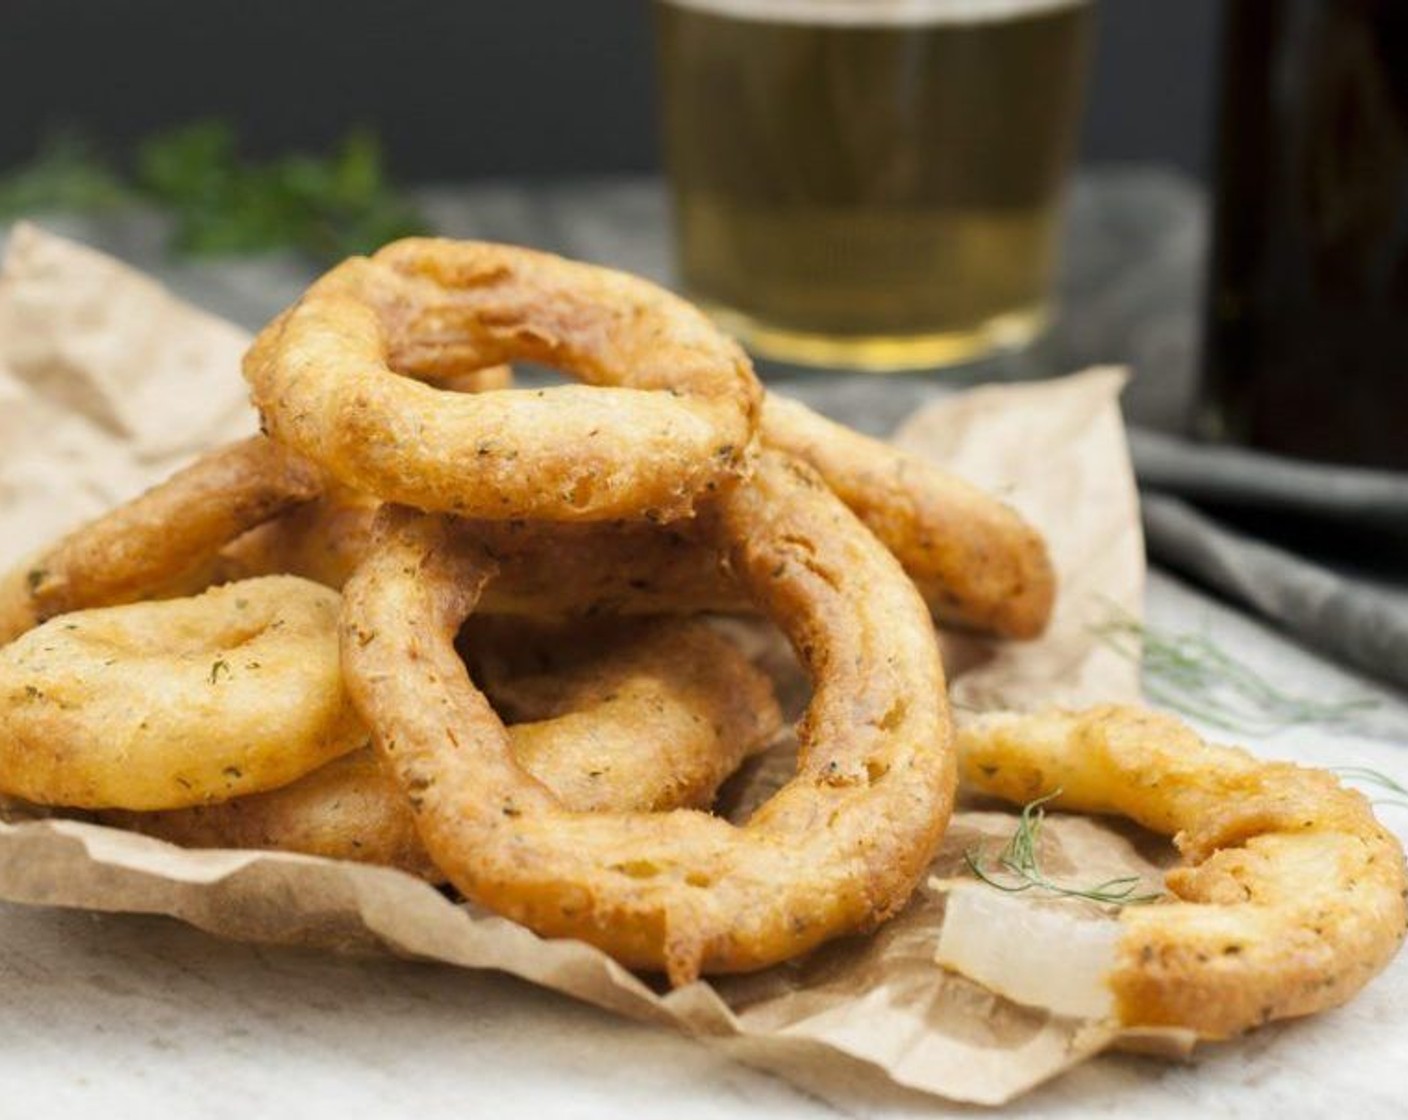 step 7 Remove with tongs or a slotted spatula to a paper towel-lined plate. Keep warm in a low oven while frying remaining onion rings. Serve warm.